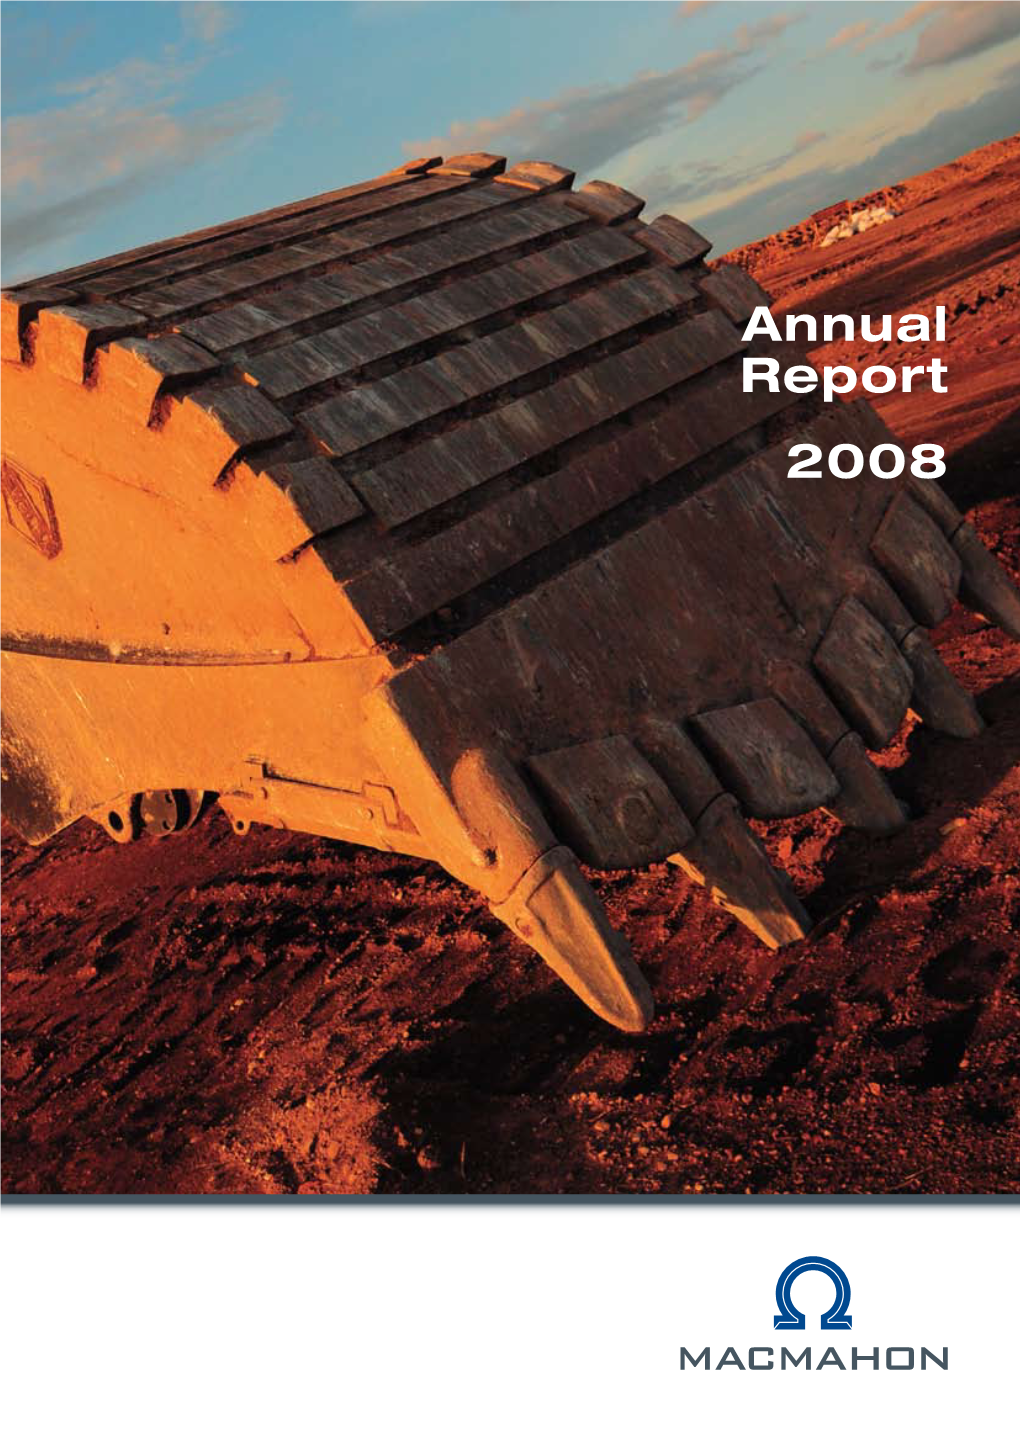 Annual Report 2008 About Macmahon